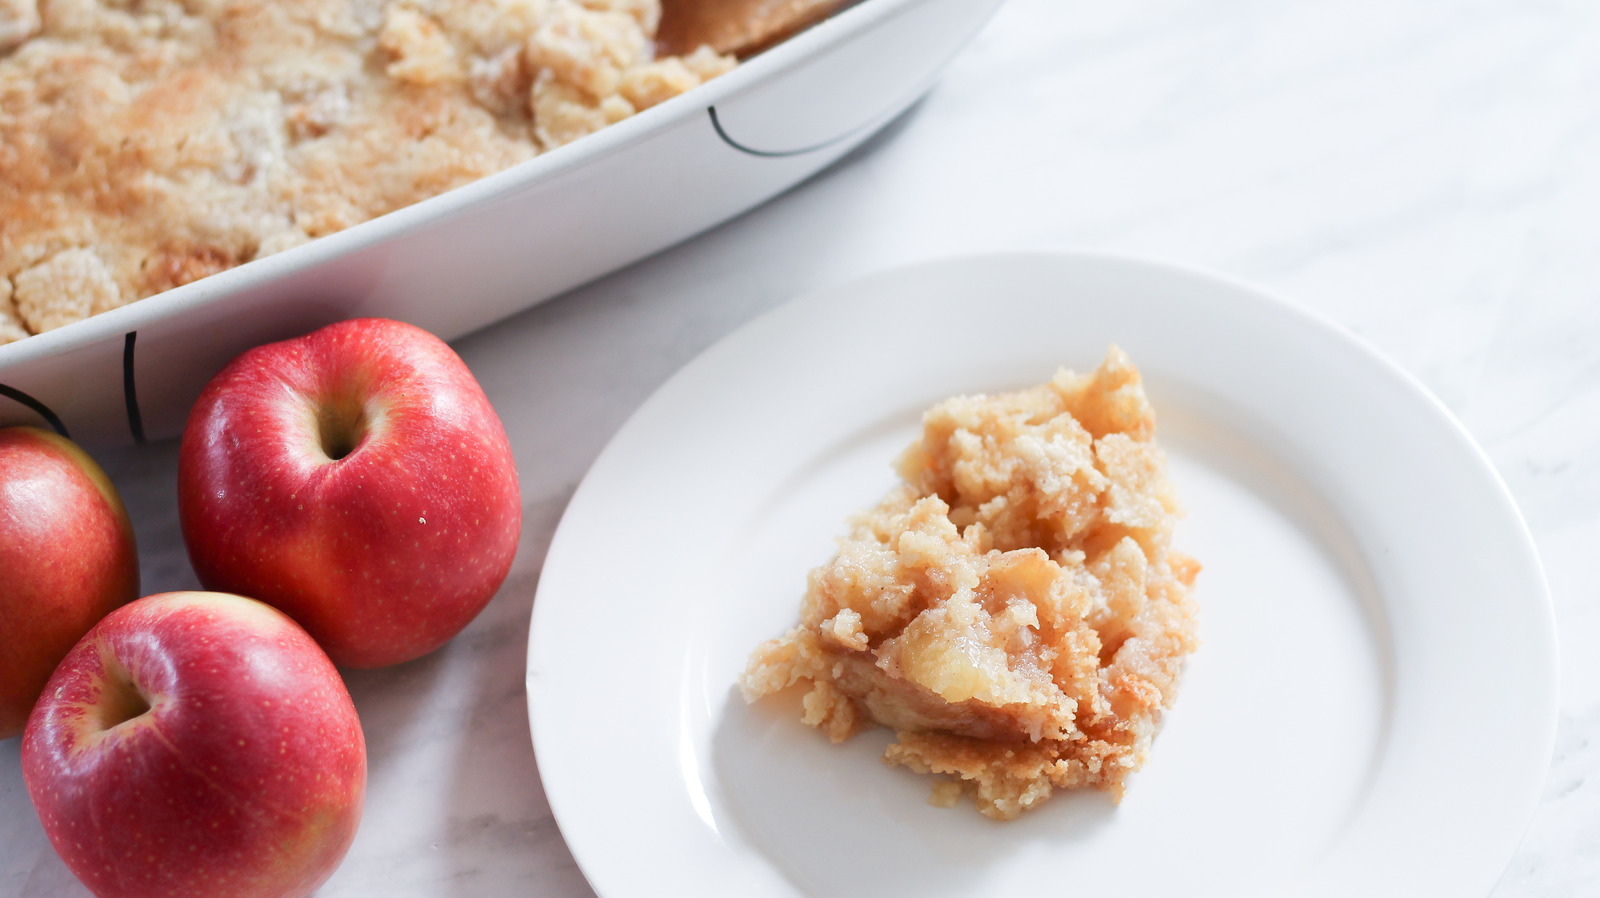 Apple Cobbler Cheesecake Recipe: How to Make It